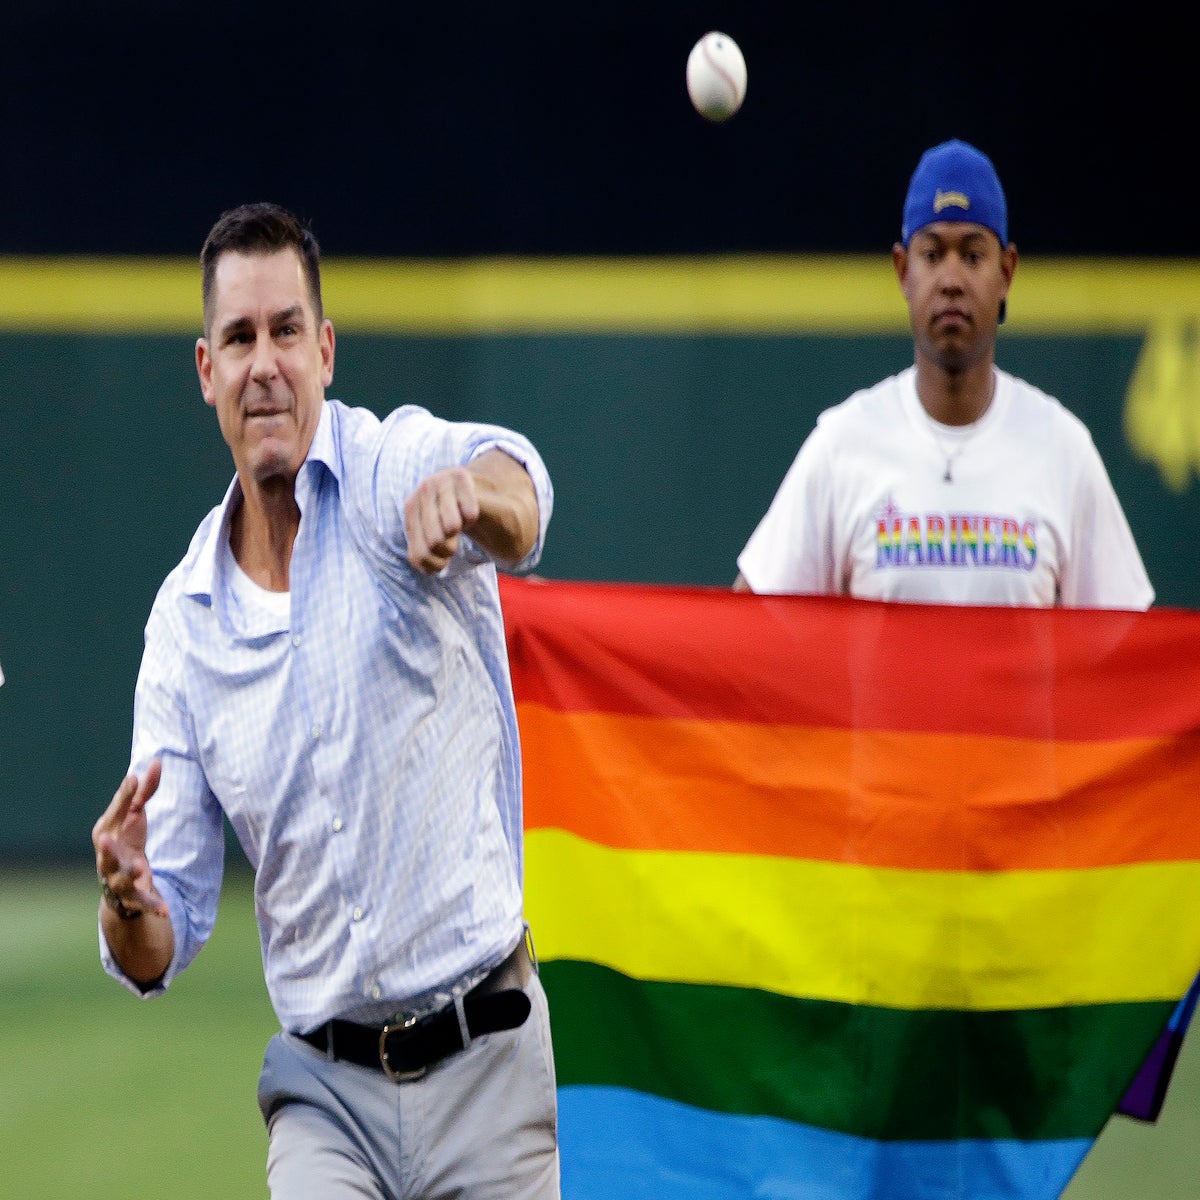 MLB teams welcome LGBTQ+ fans with Pride Nights, but wait